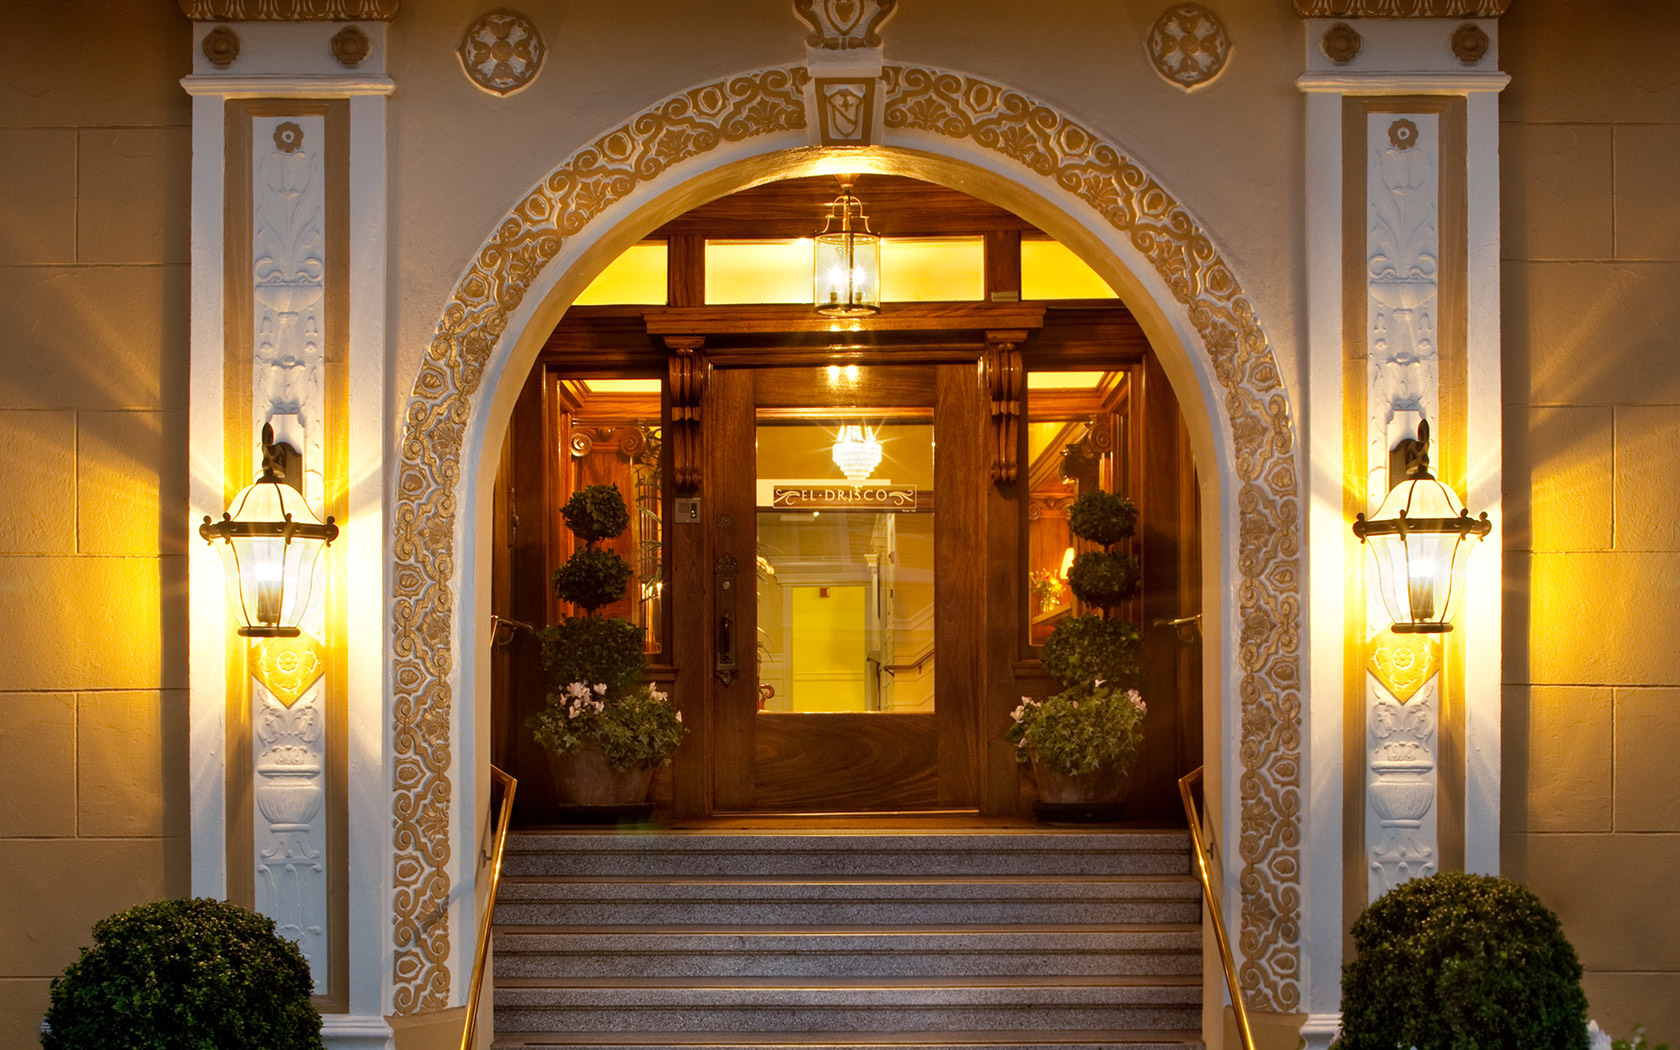 View of the elegant Hotel Drisco entrance